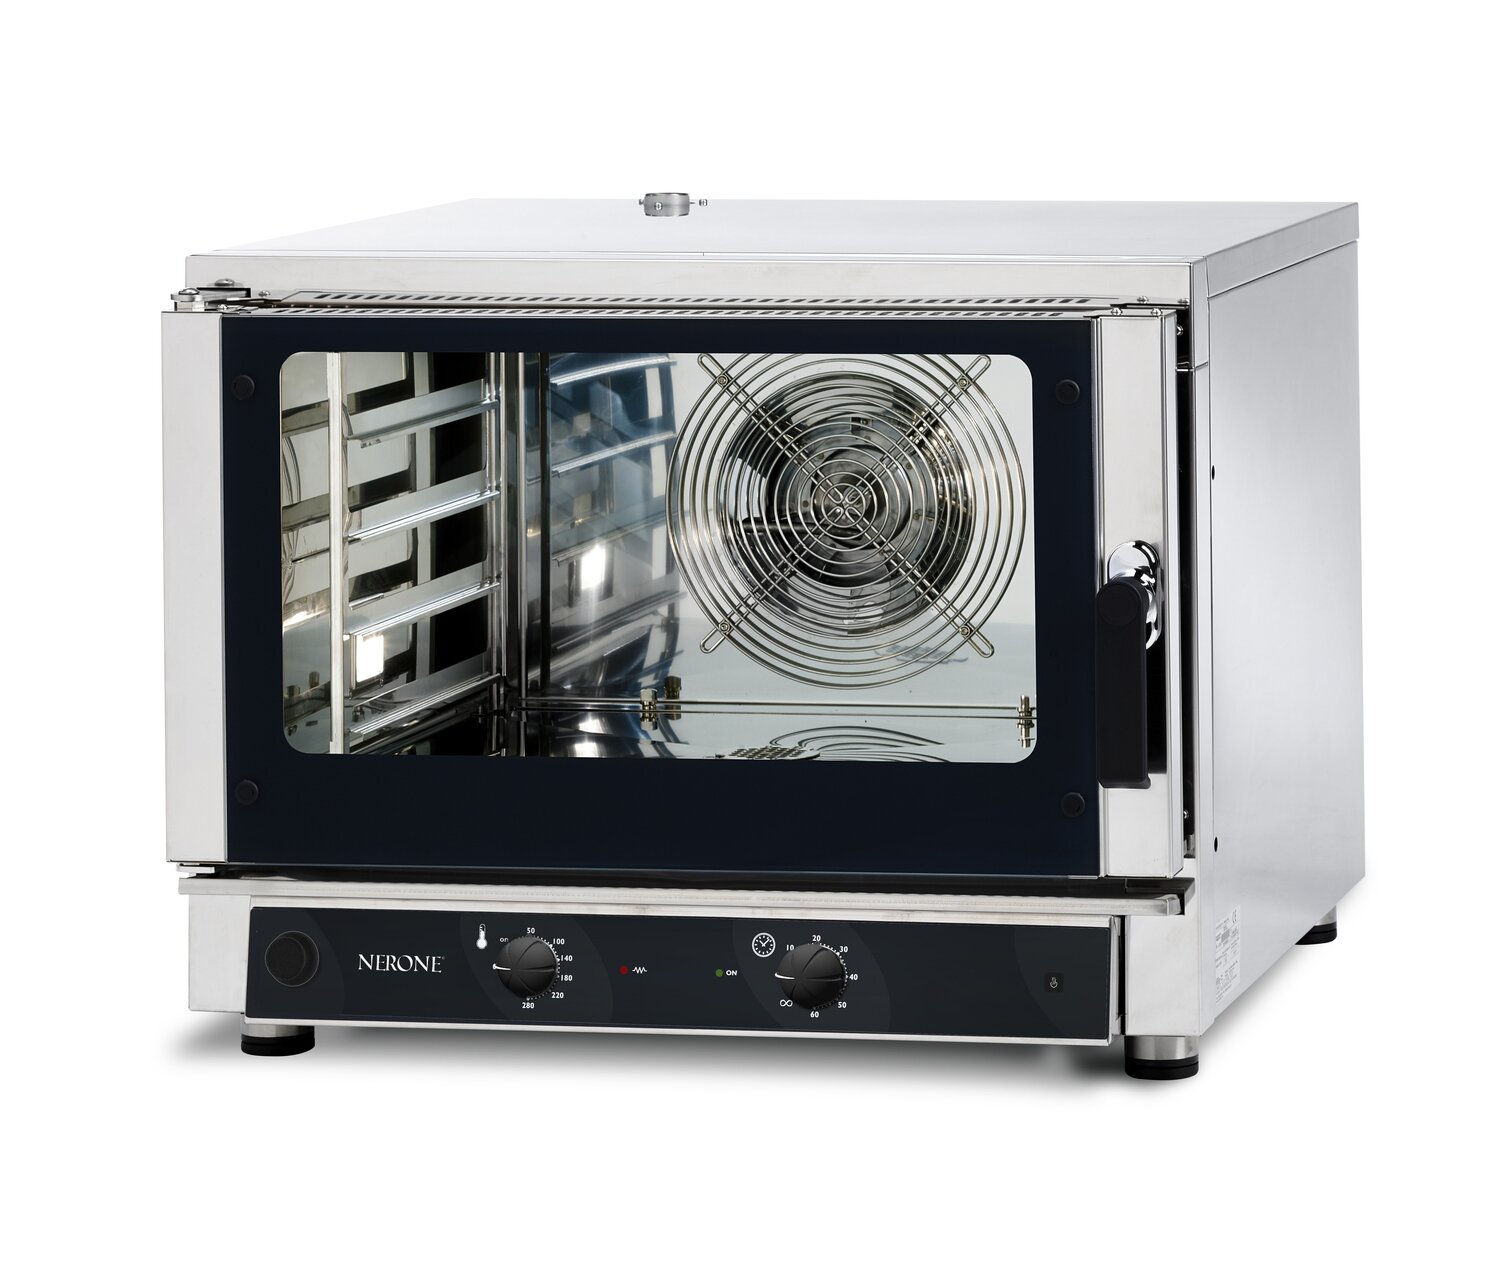 SARO Convection combination oven with Humidification model MID 4